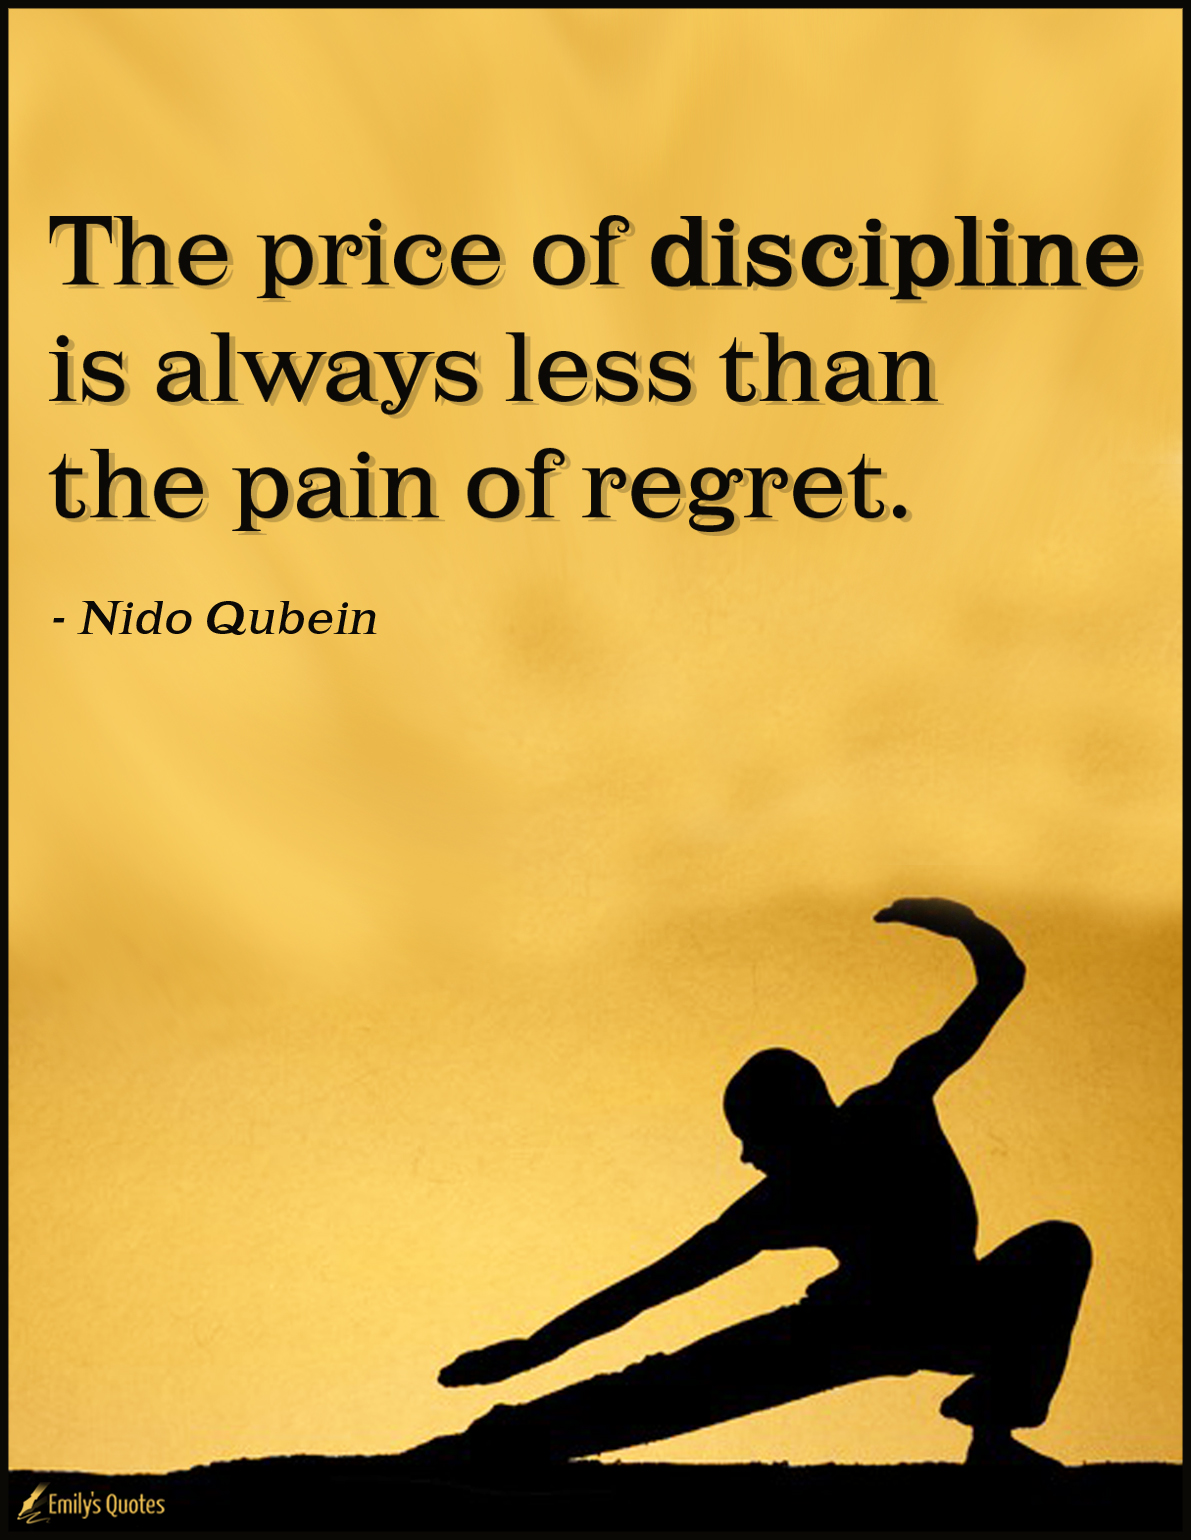 The price of discipline is always less than the pain of regret